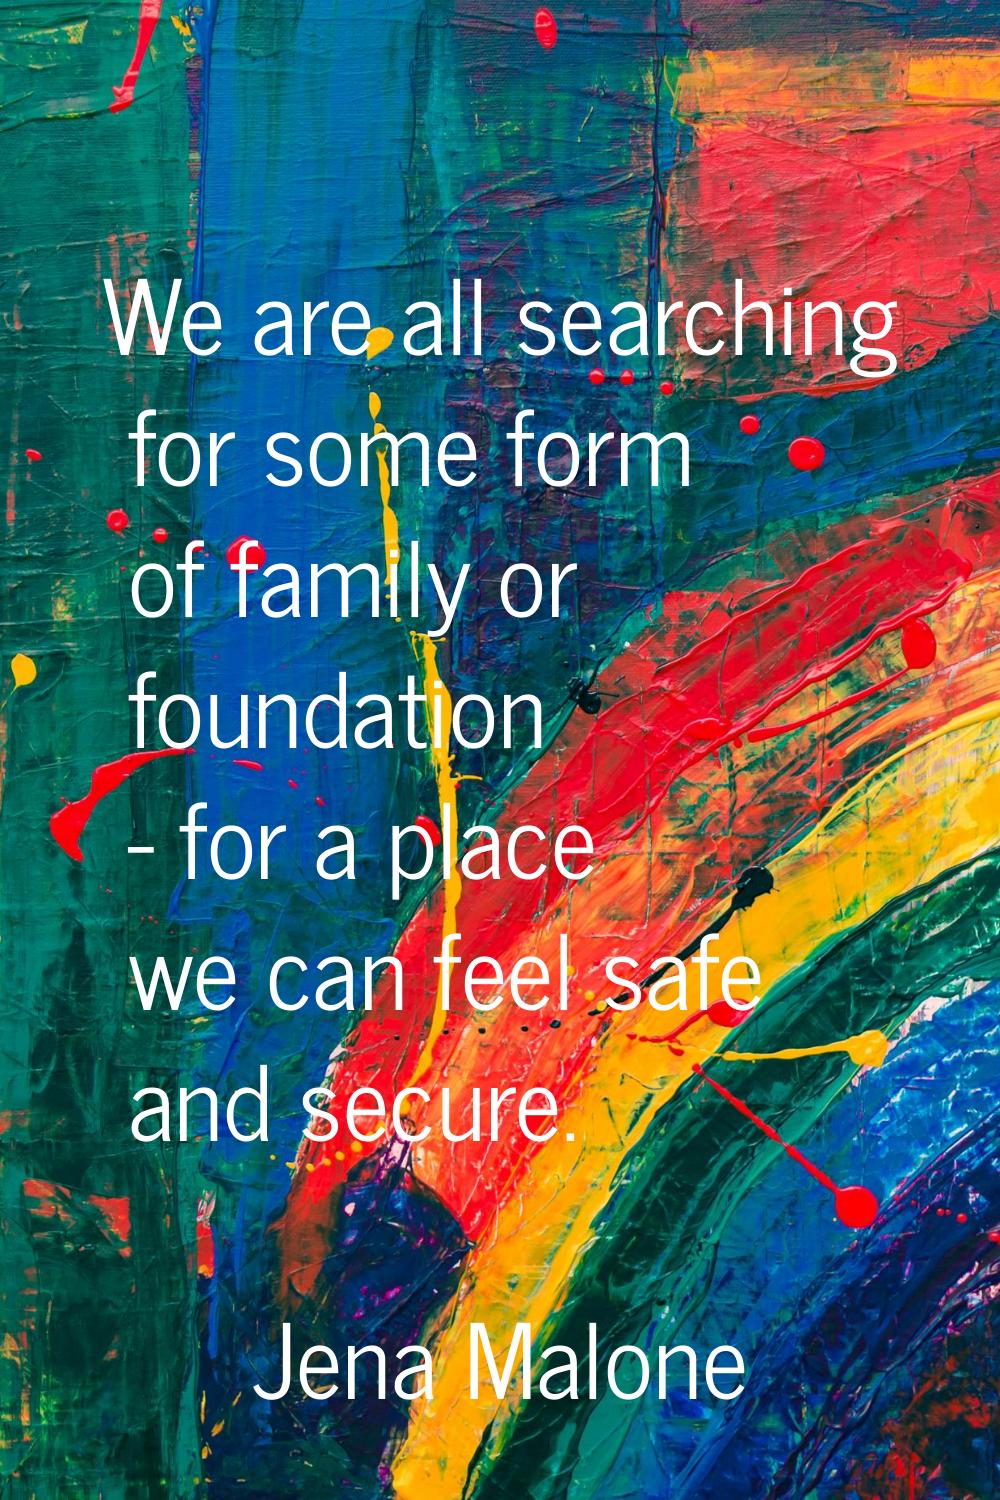 We are all searching for some form of family or foundation - for a place we can feel safe and secur